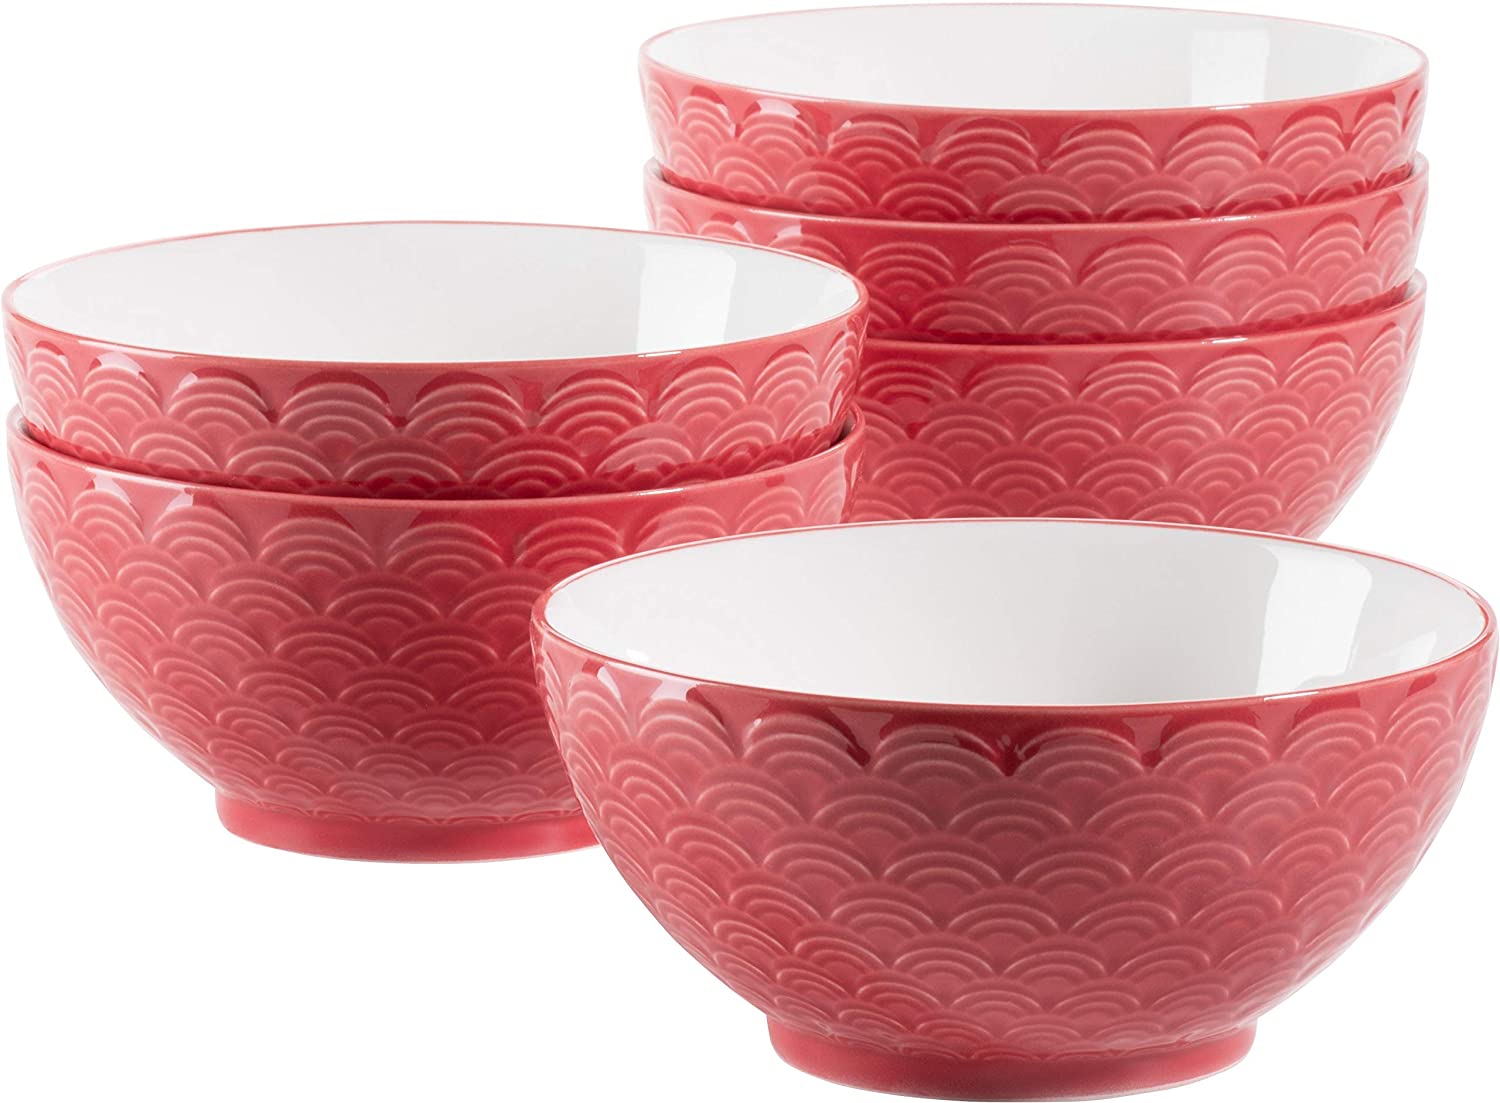 Maser MÄSER 931574 Telde Series Cereal Bowls Set in Catering Quality, 6 Bowls with Pretty Relief Surface, Durable Porcelain, Red